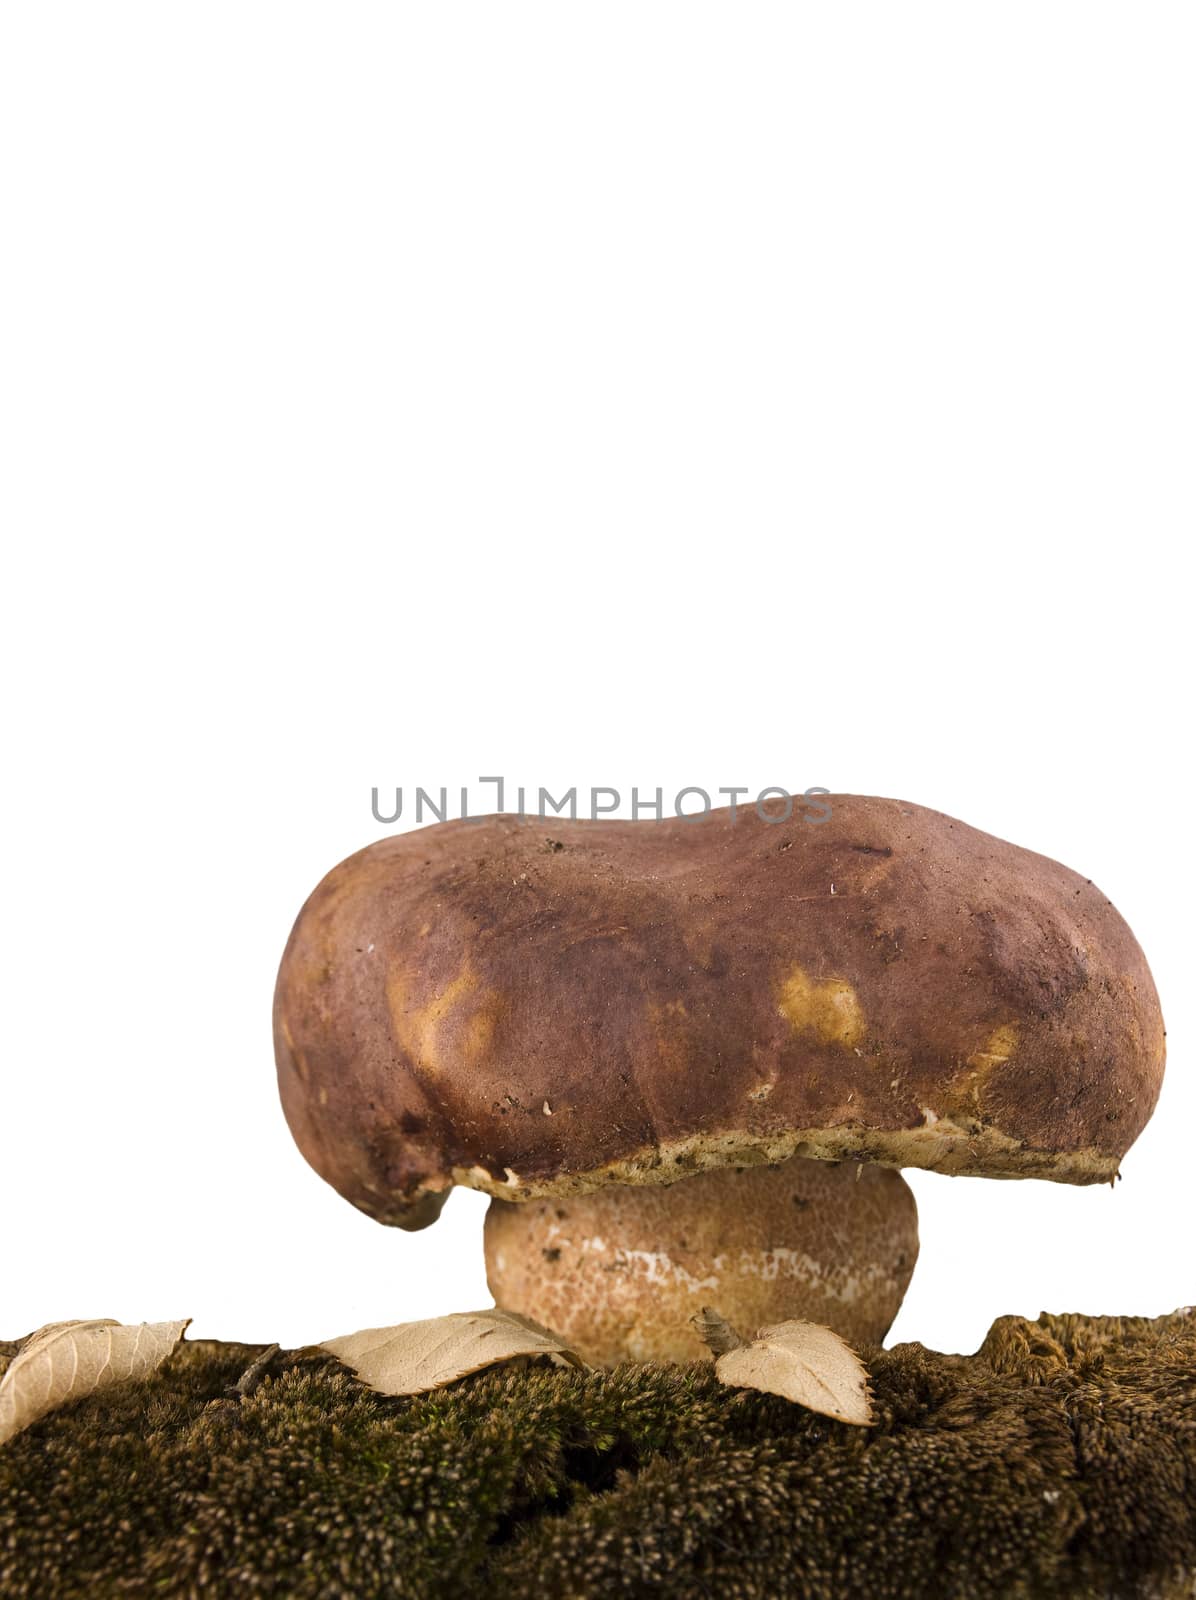 porcini mushrooms and moss isolated on white background by sette